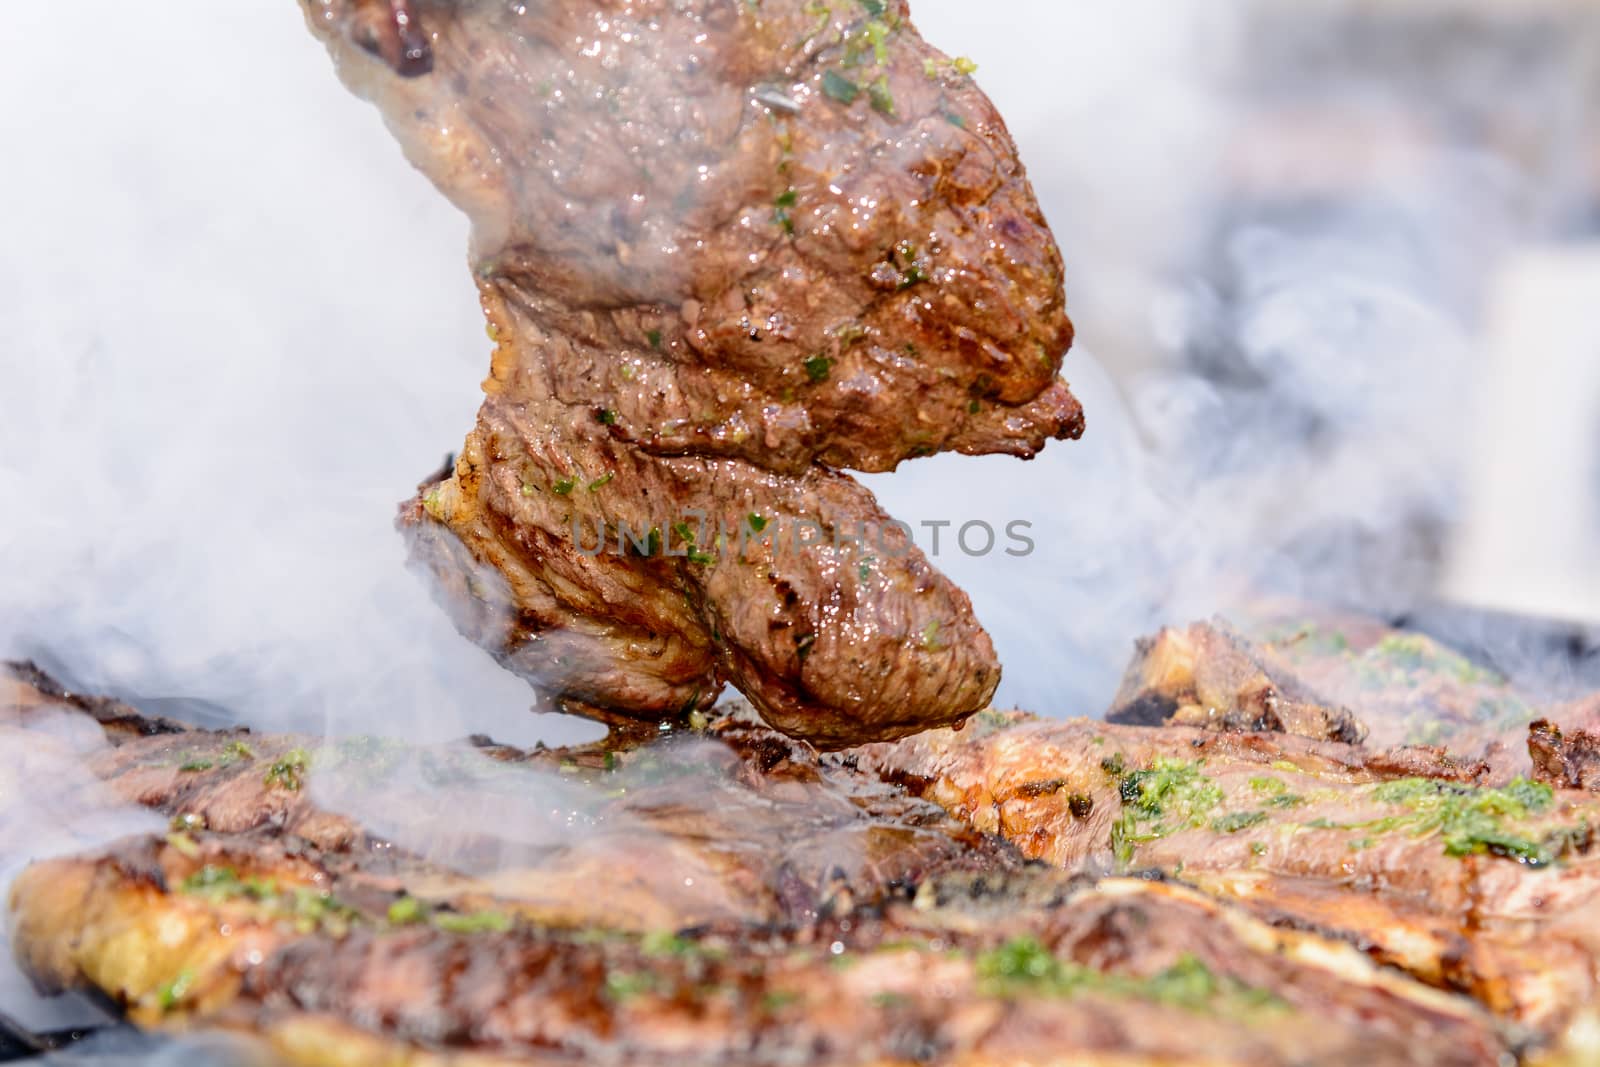 Roast beef, cooked in the outdoor barbecue in a rural location. Sauce: olive oil, salt, parsley.